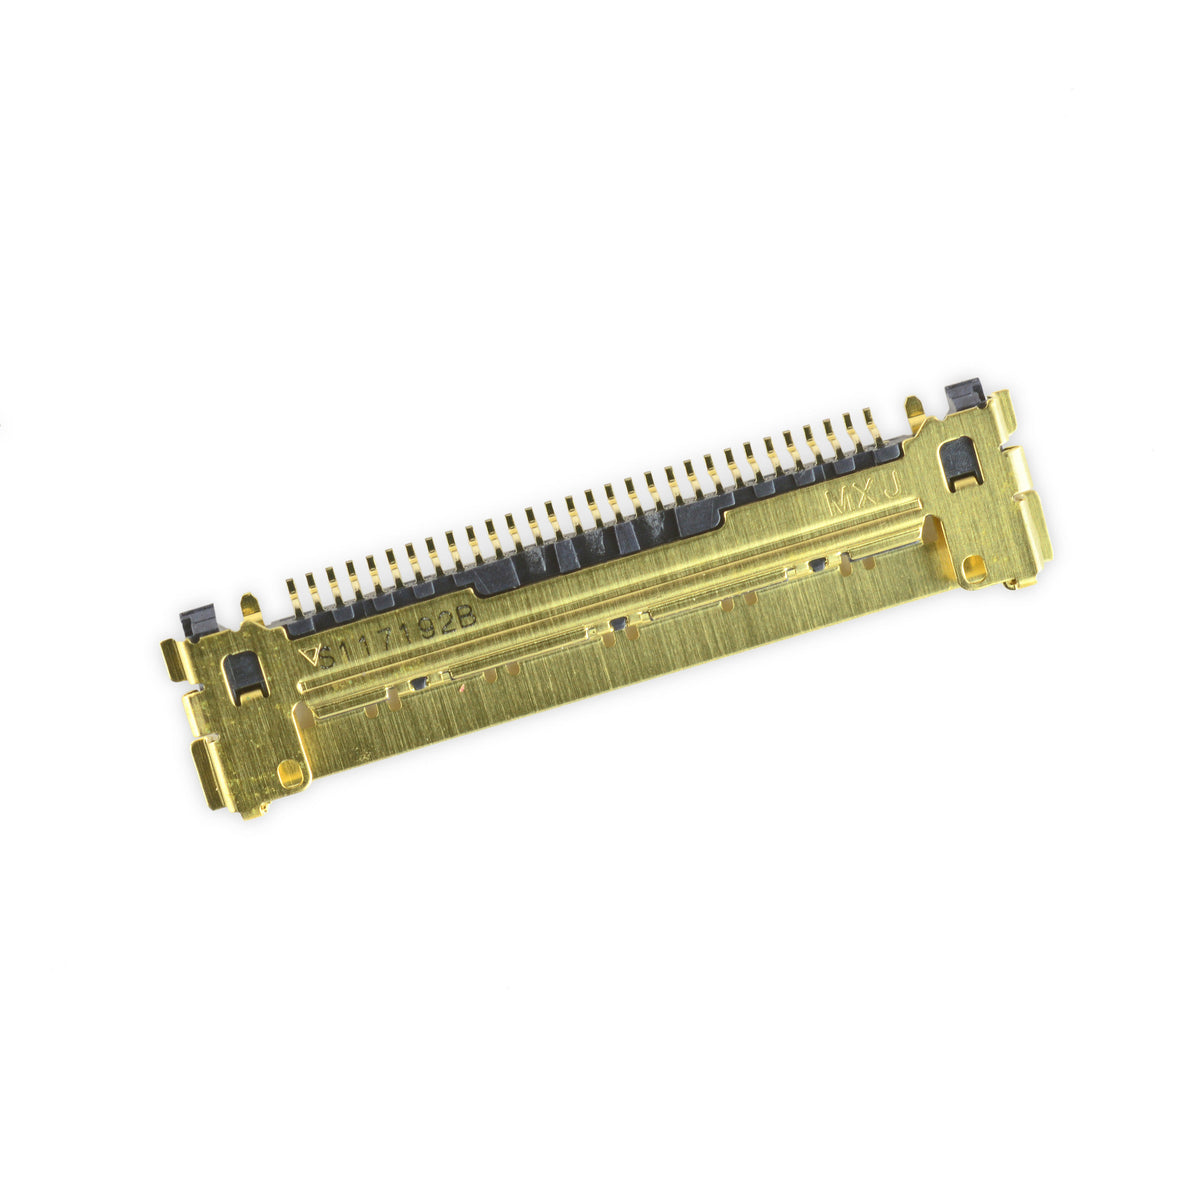 LCD FPC CONNECTOR (41 PIN) FOR IPAD 2 (J2201:)